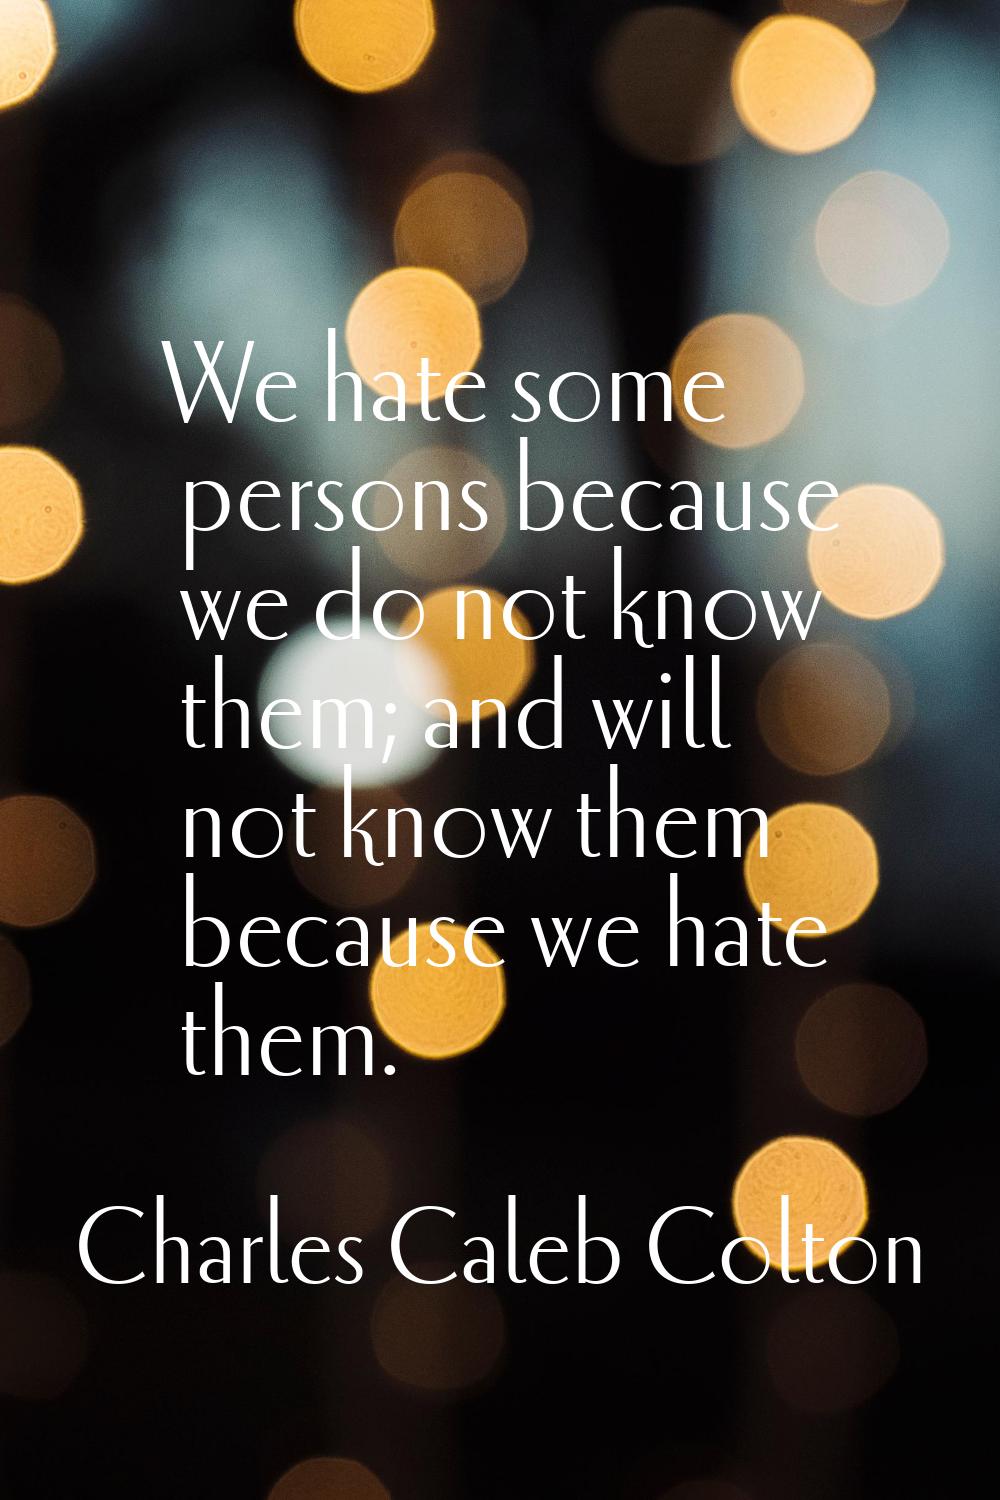 We hate some persons because we do not know them; and will not know them because we hate them.